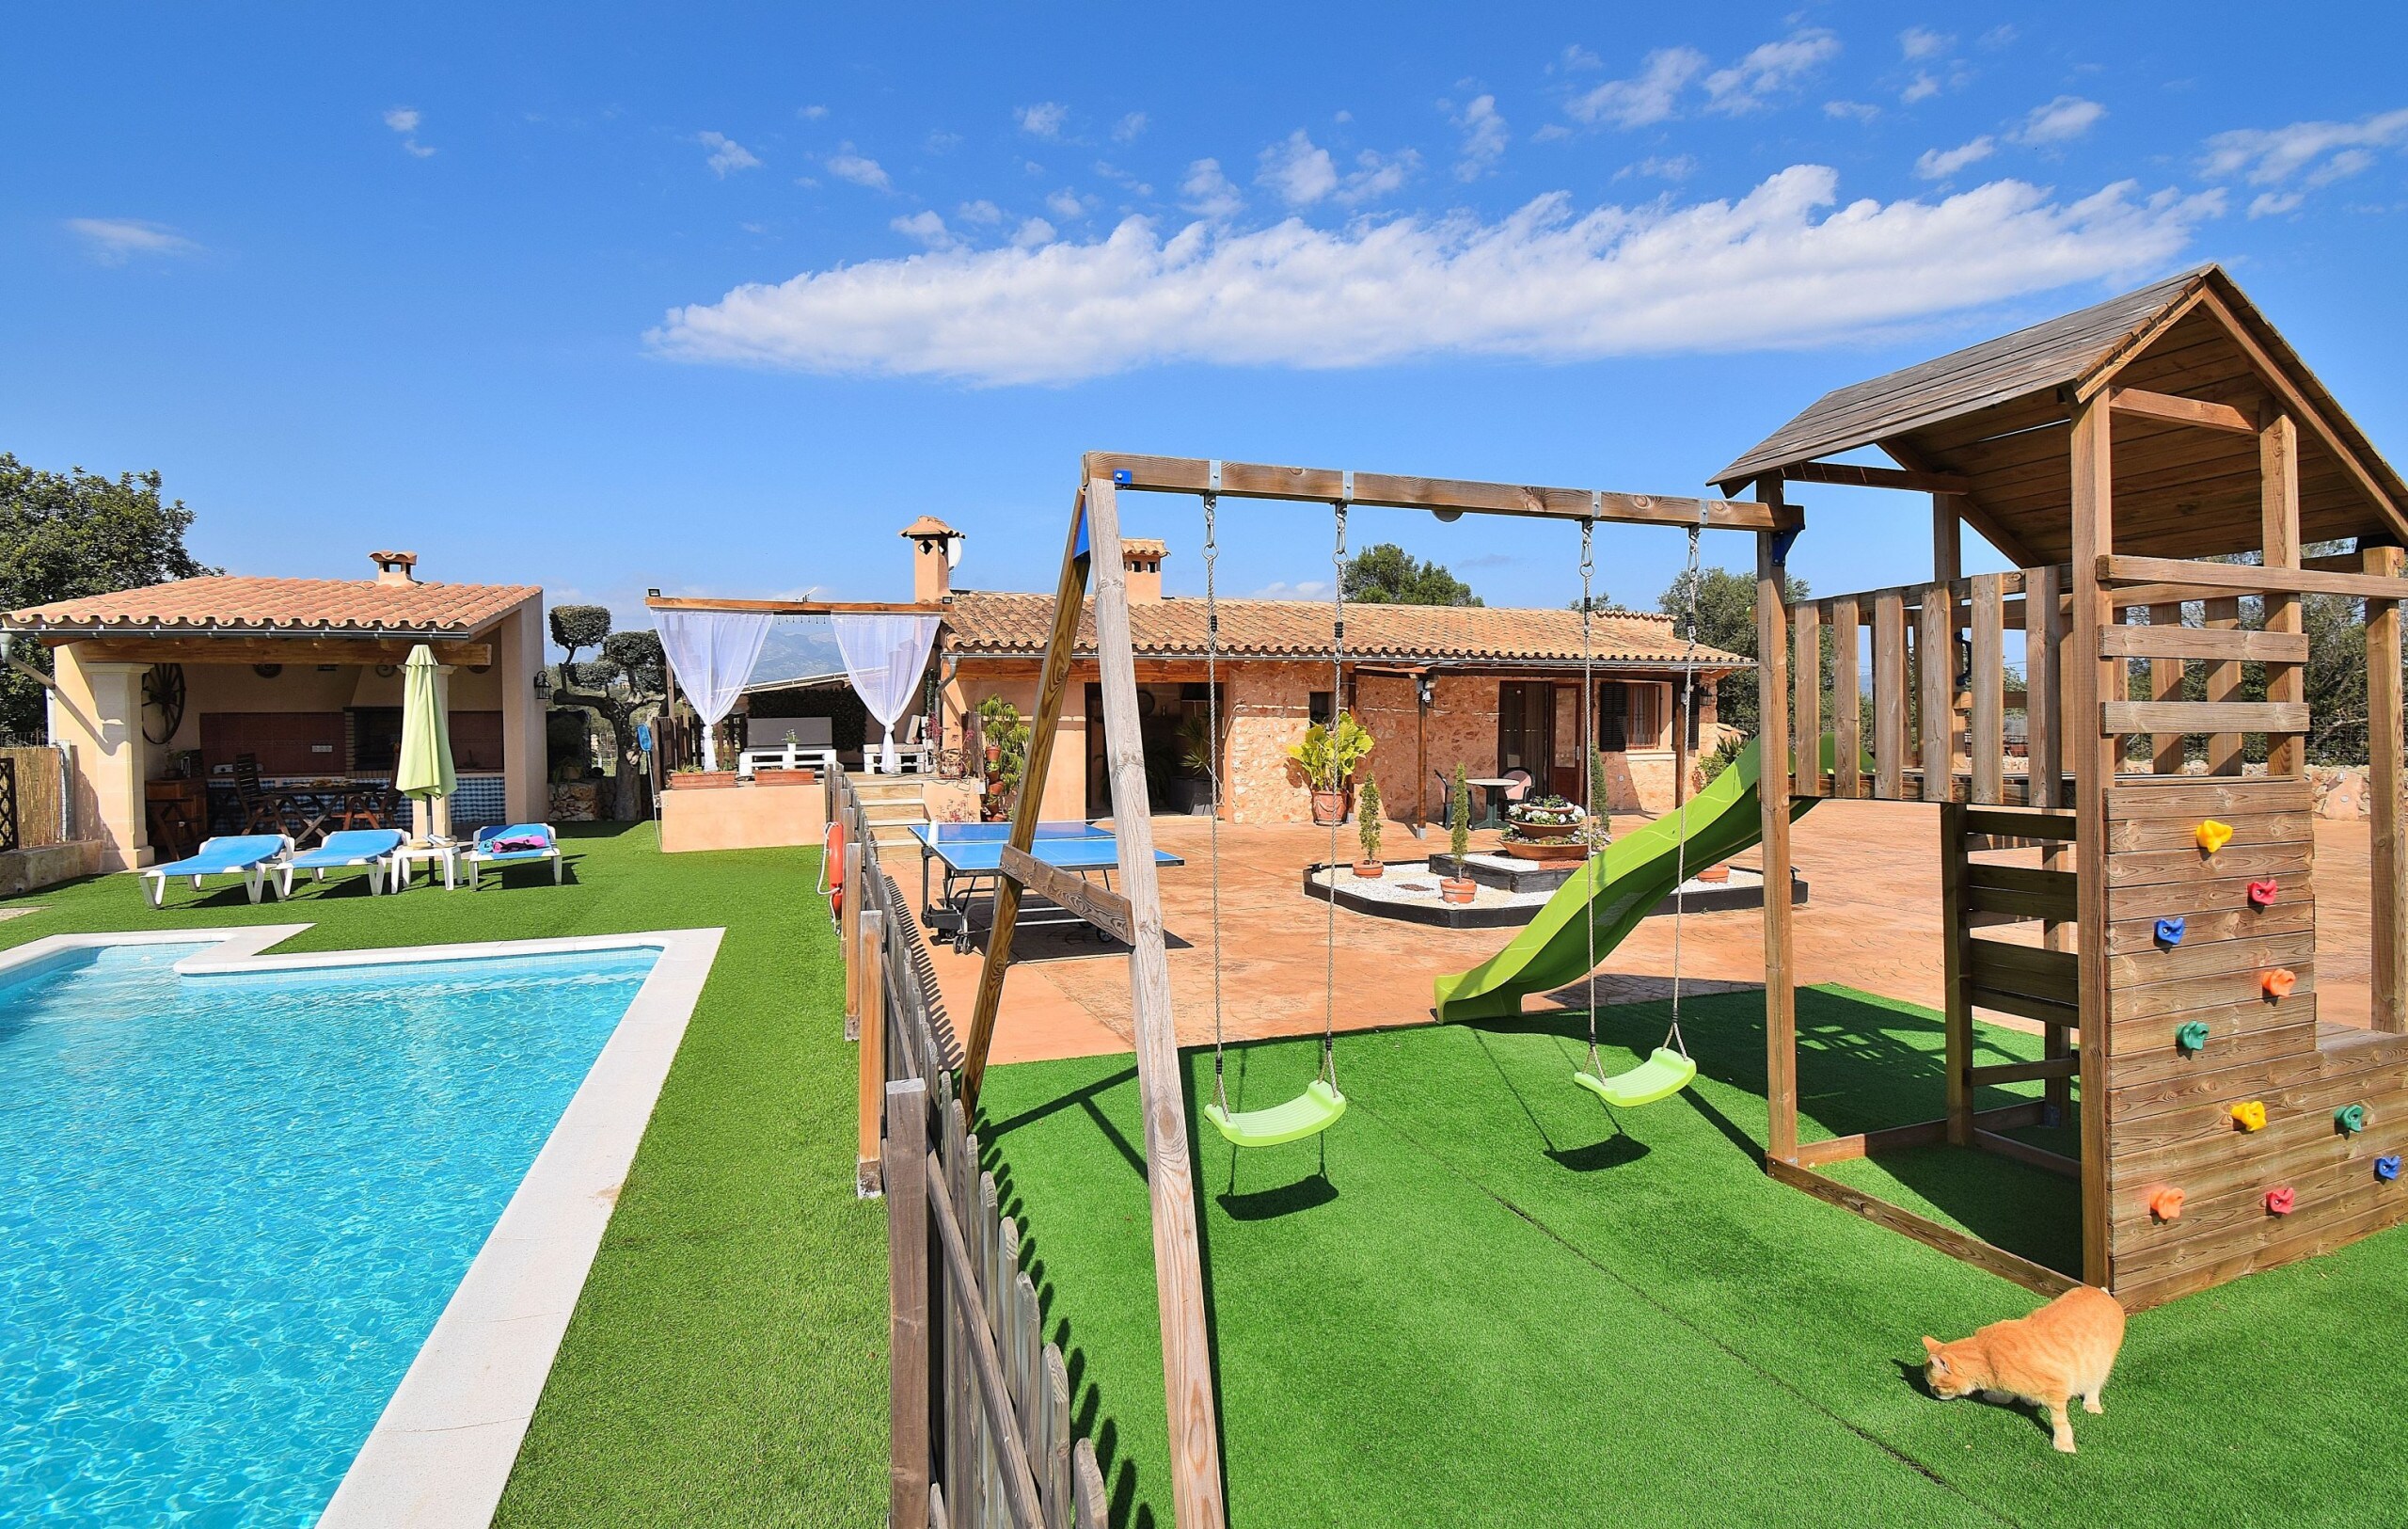 house with swimming pool and playground for children